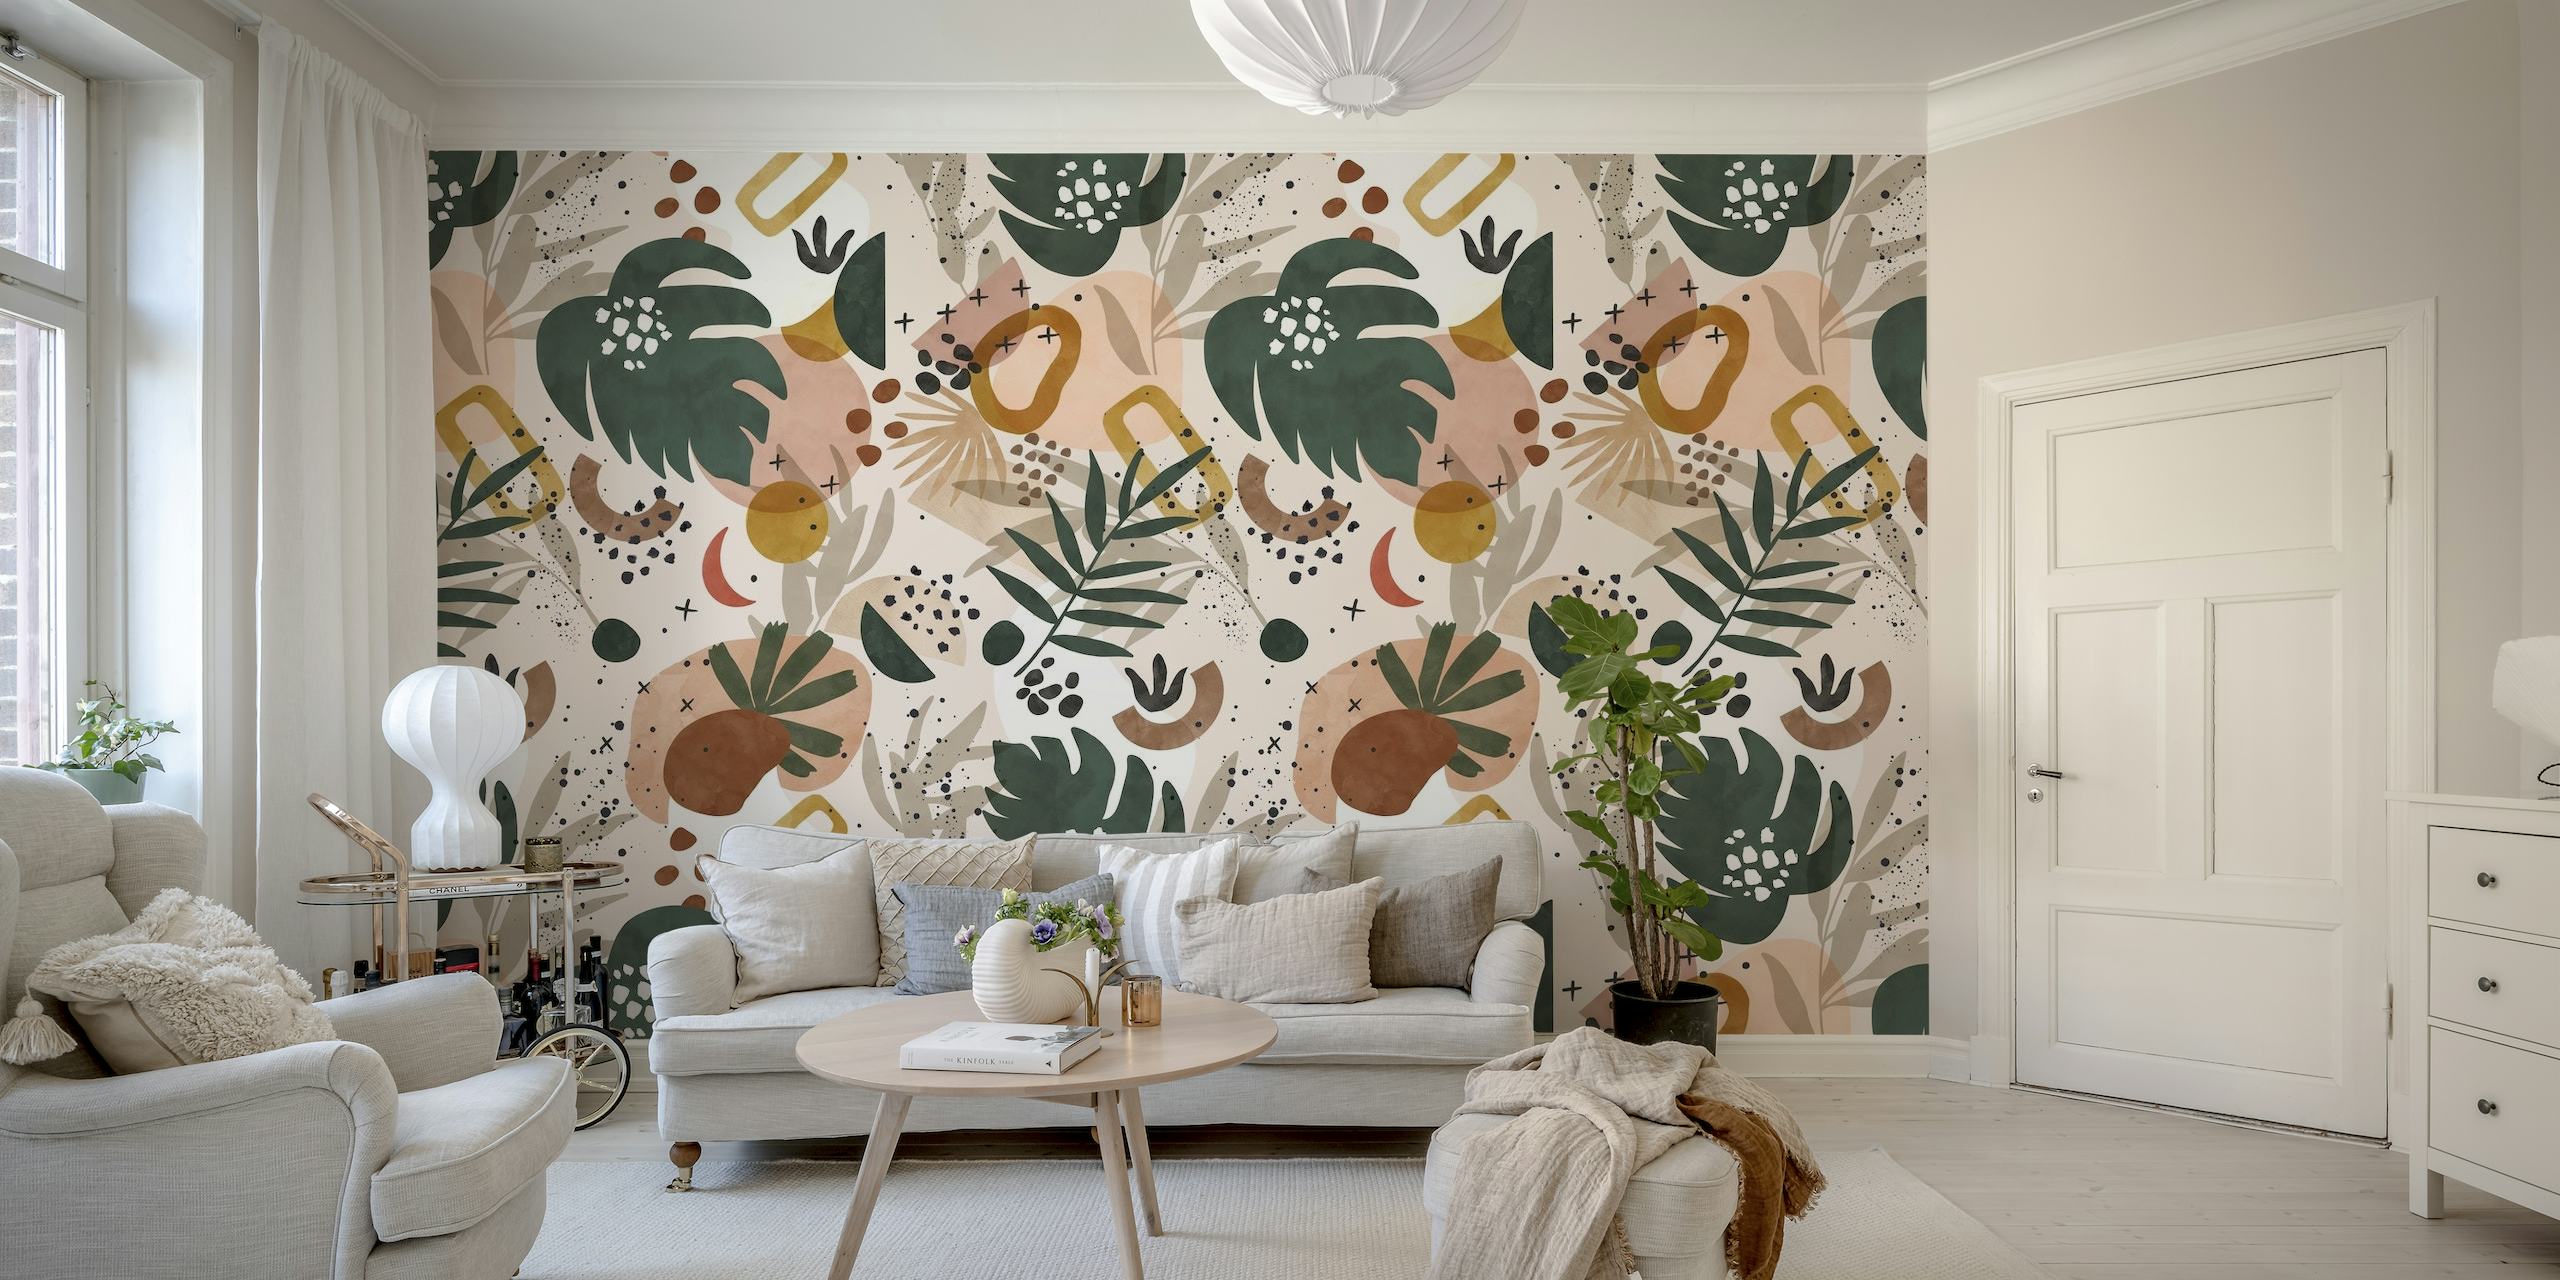 Abstract nature wall mural with tropical foliage and geometric shapes